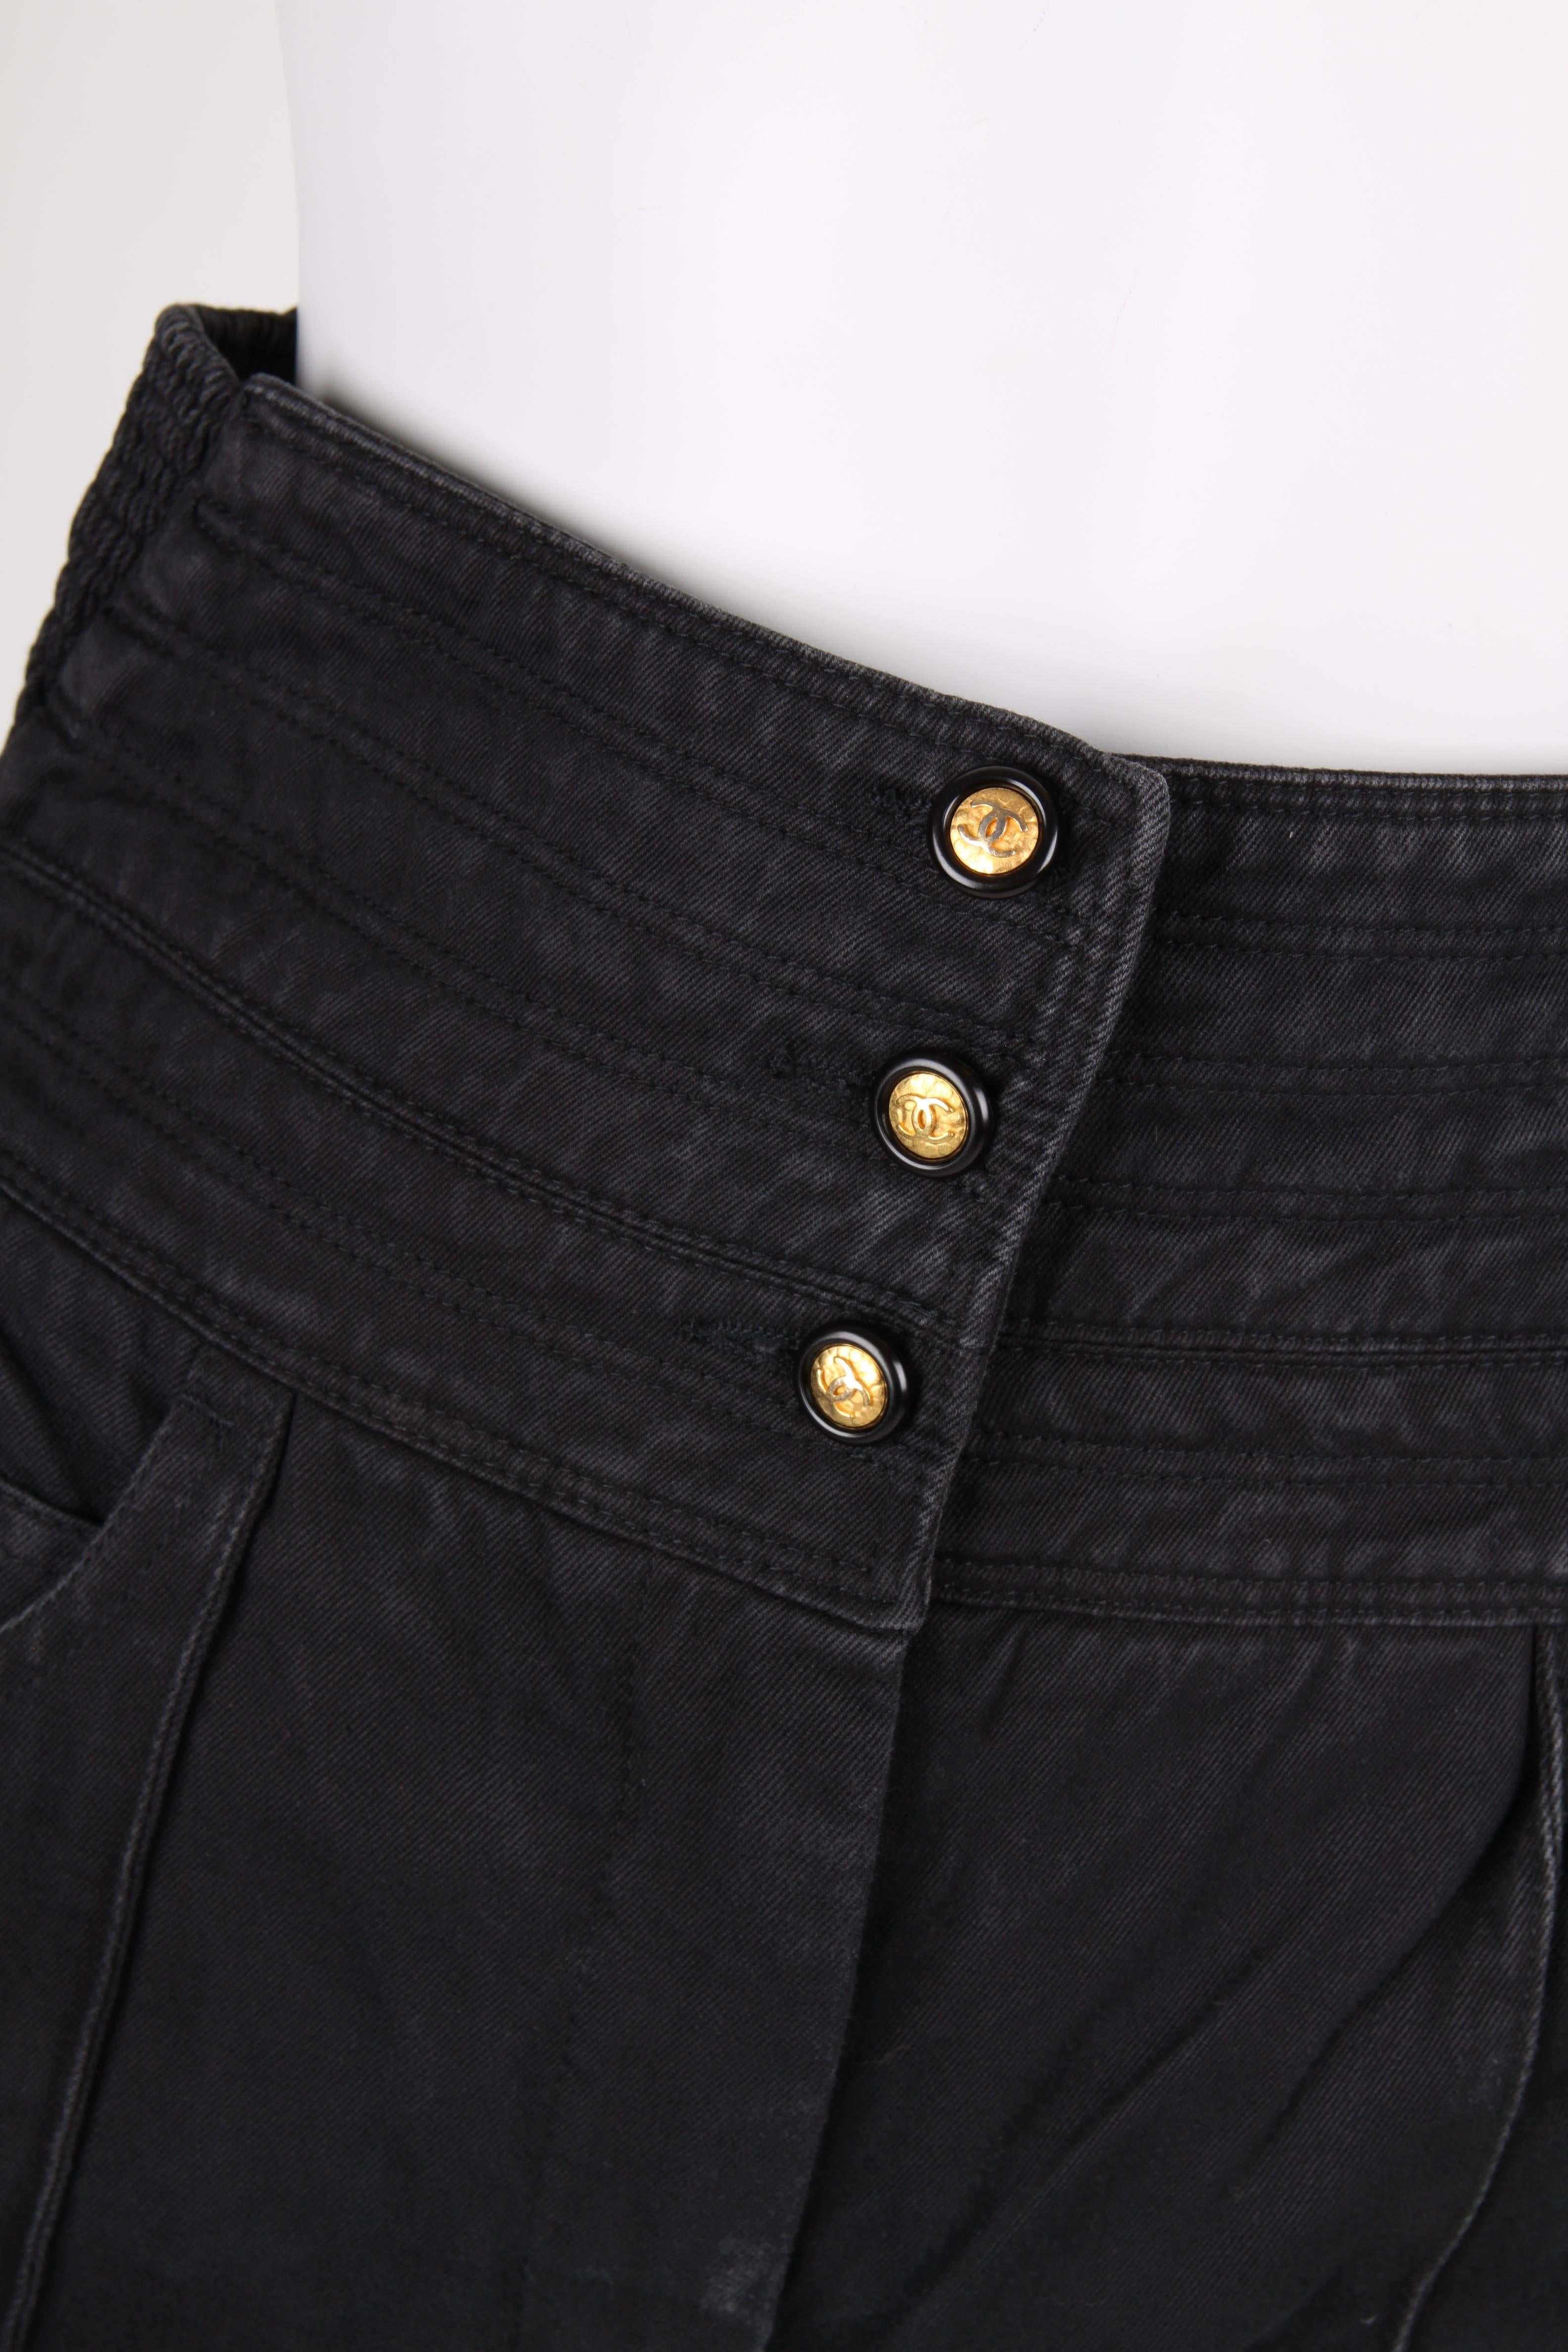 Fantastic pair of bell bottom trousers by Chanel, spring collection 2003.

Made of 100% cotton, has a high waist and closes with three black/golden buttons embellished with the CC logo. Some elastic has been added to the waist for extra comfortable